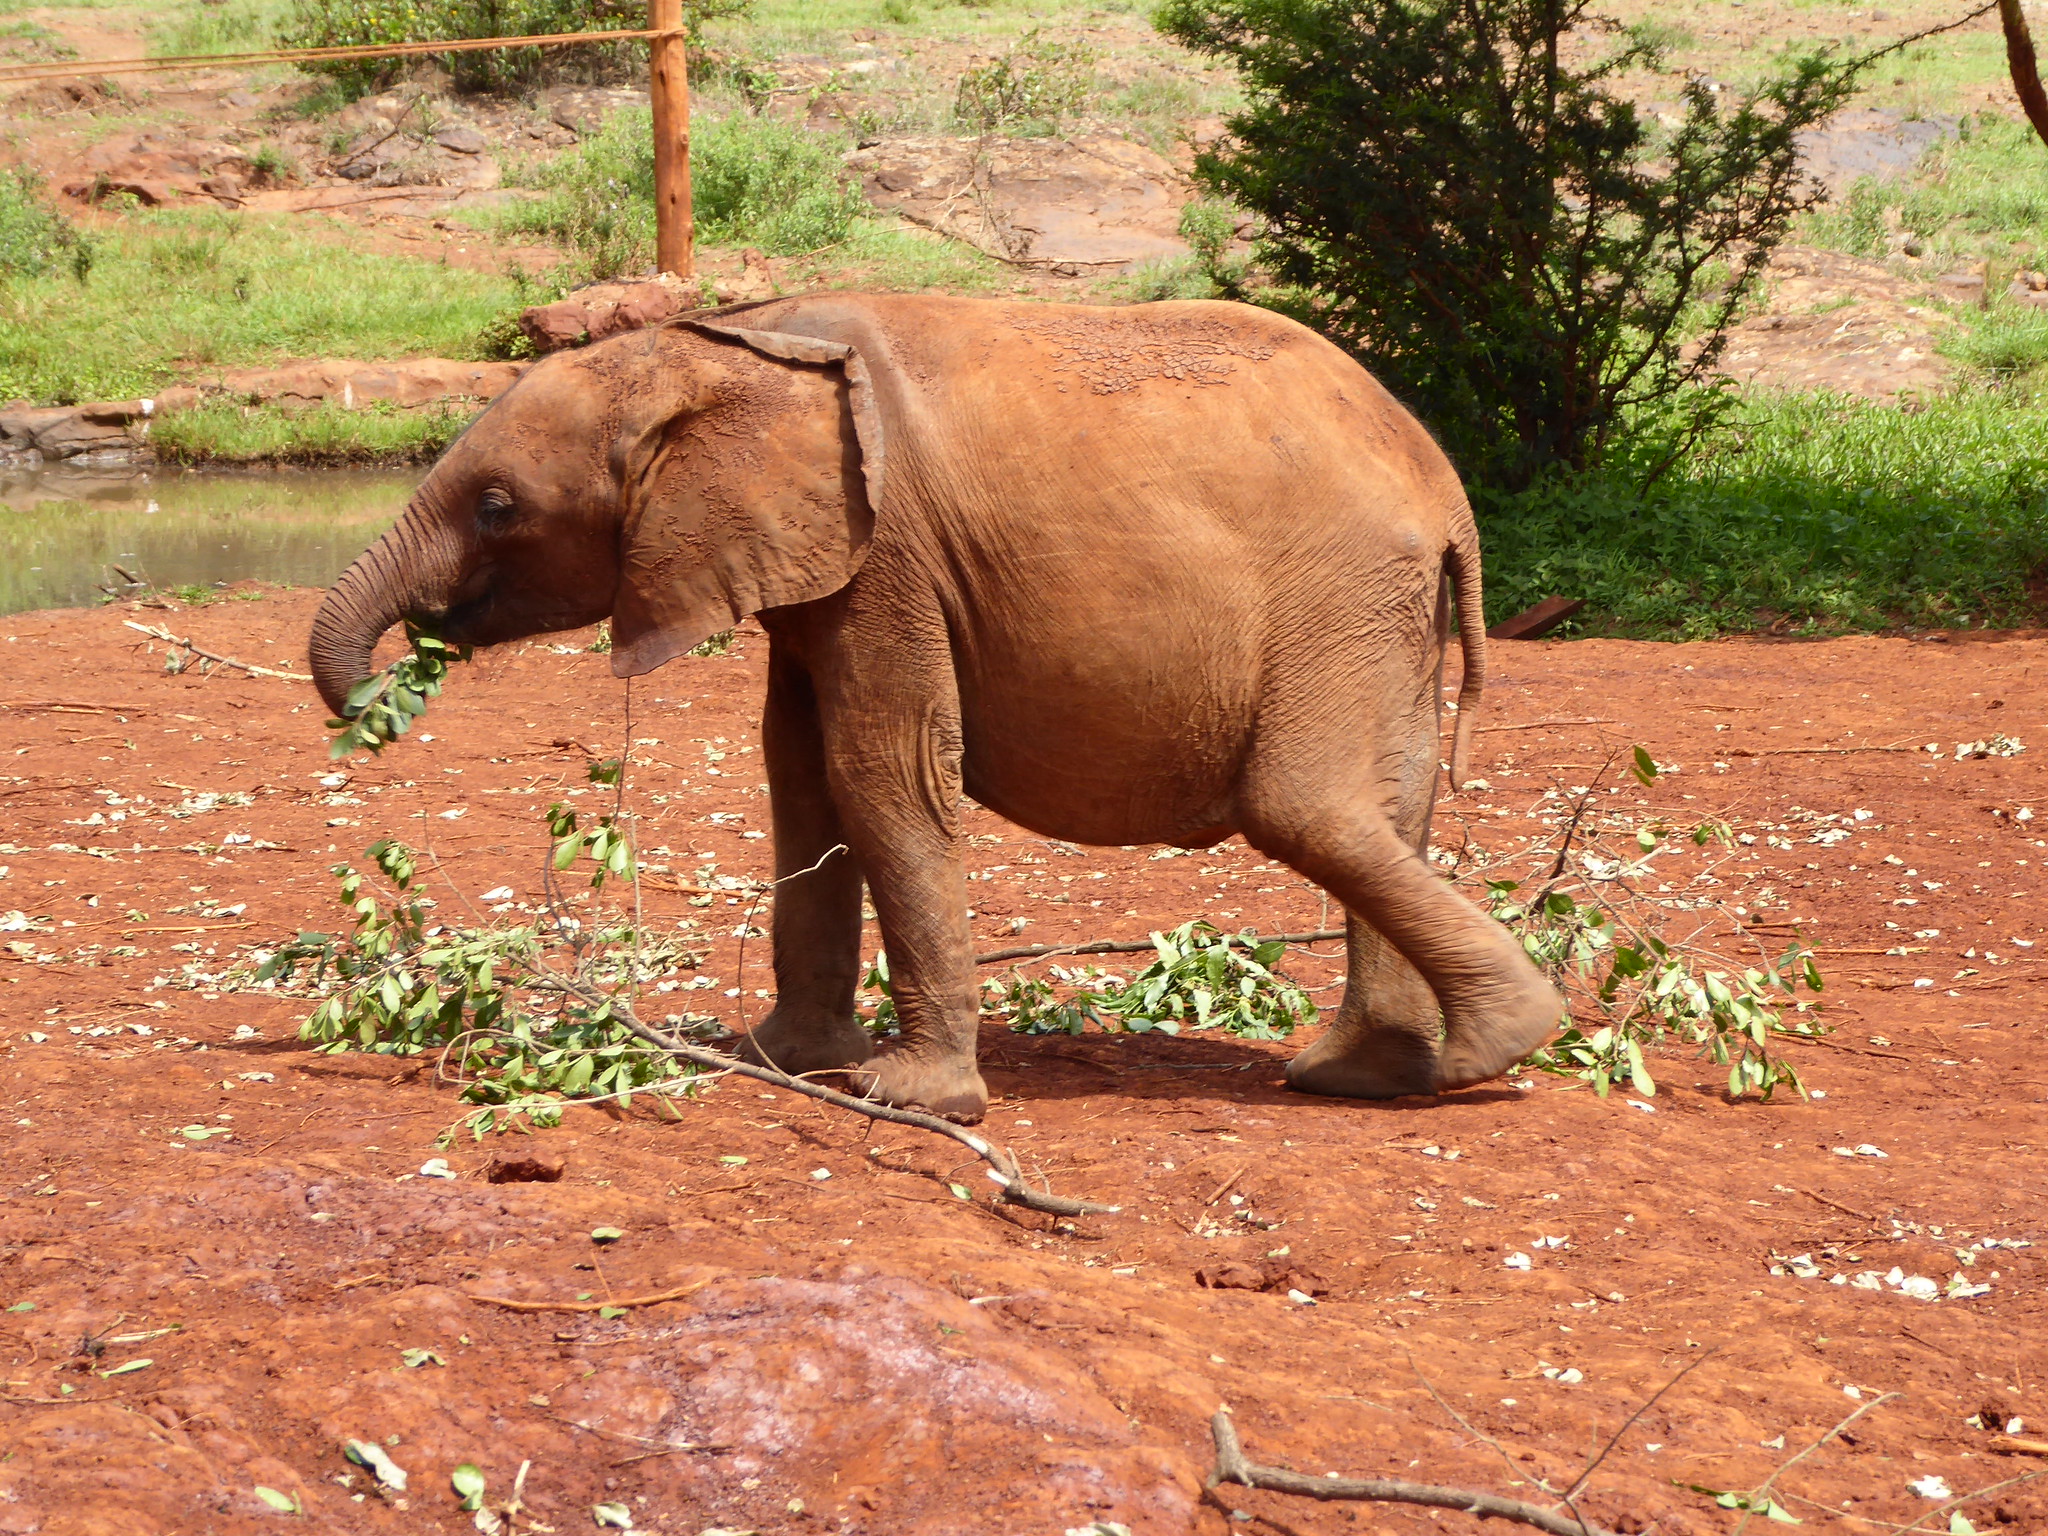 A young elephant plays with tree branches at Sheldrick Wildlife Trust's Orphans' Project